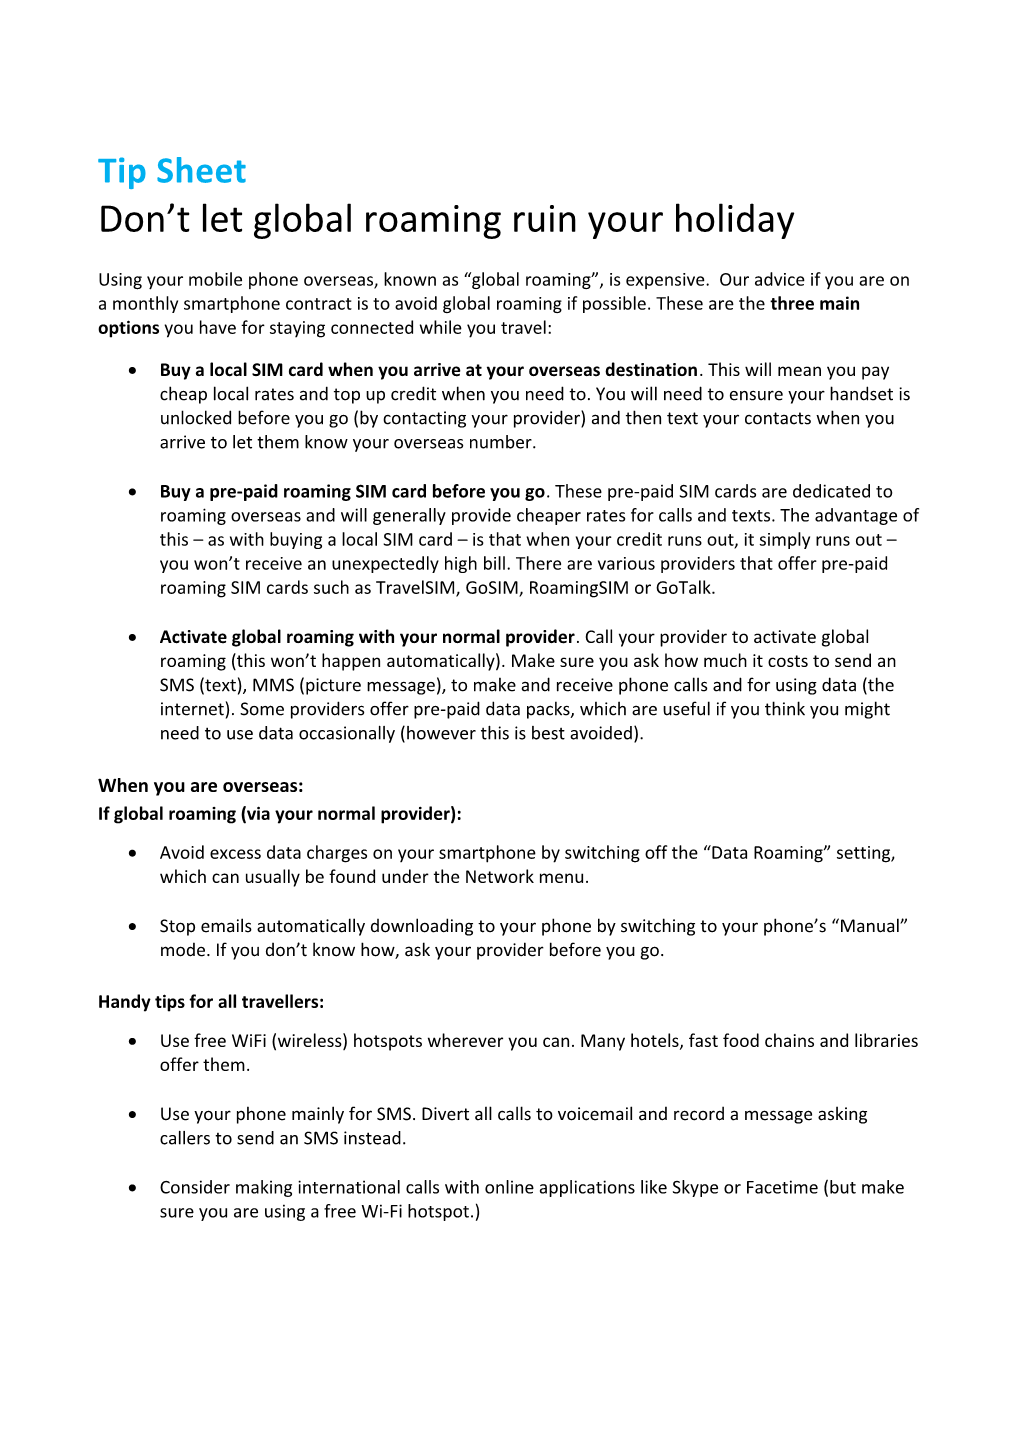 Tip Sheet Don T Let Global Roaming Ruin Your Holiday Using Your Mobile Phone Overseas